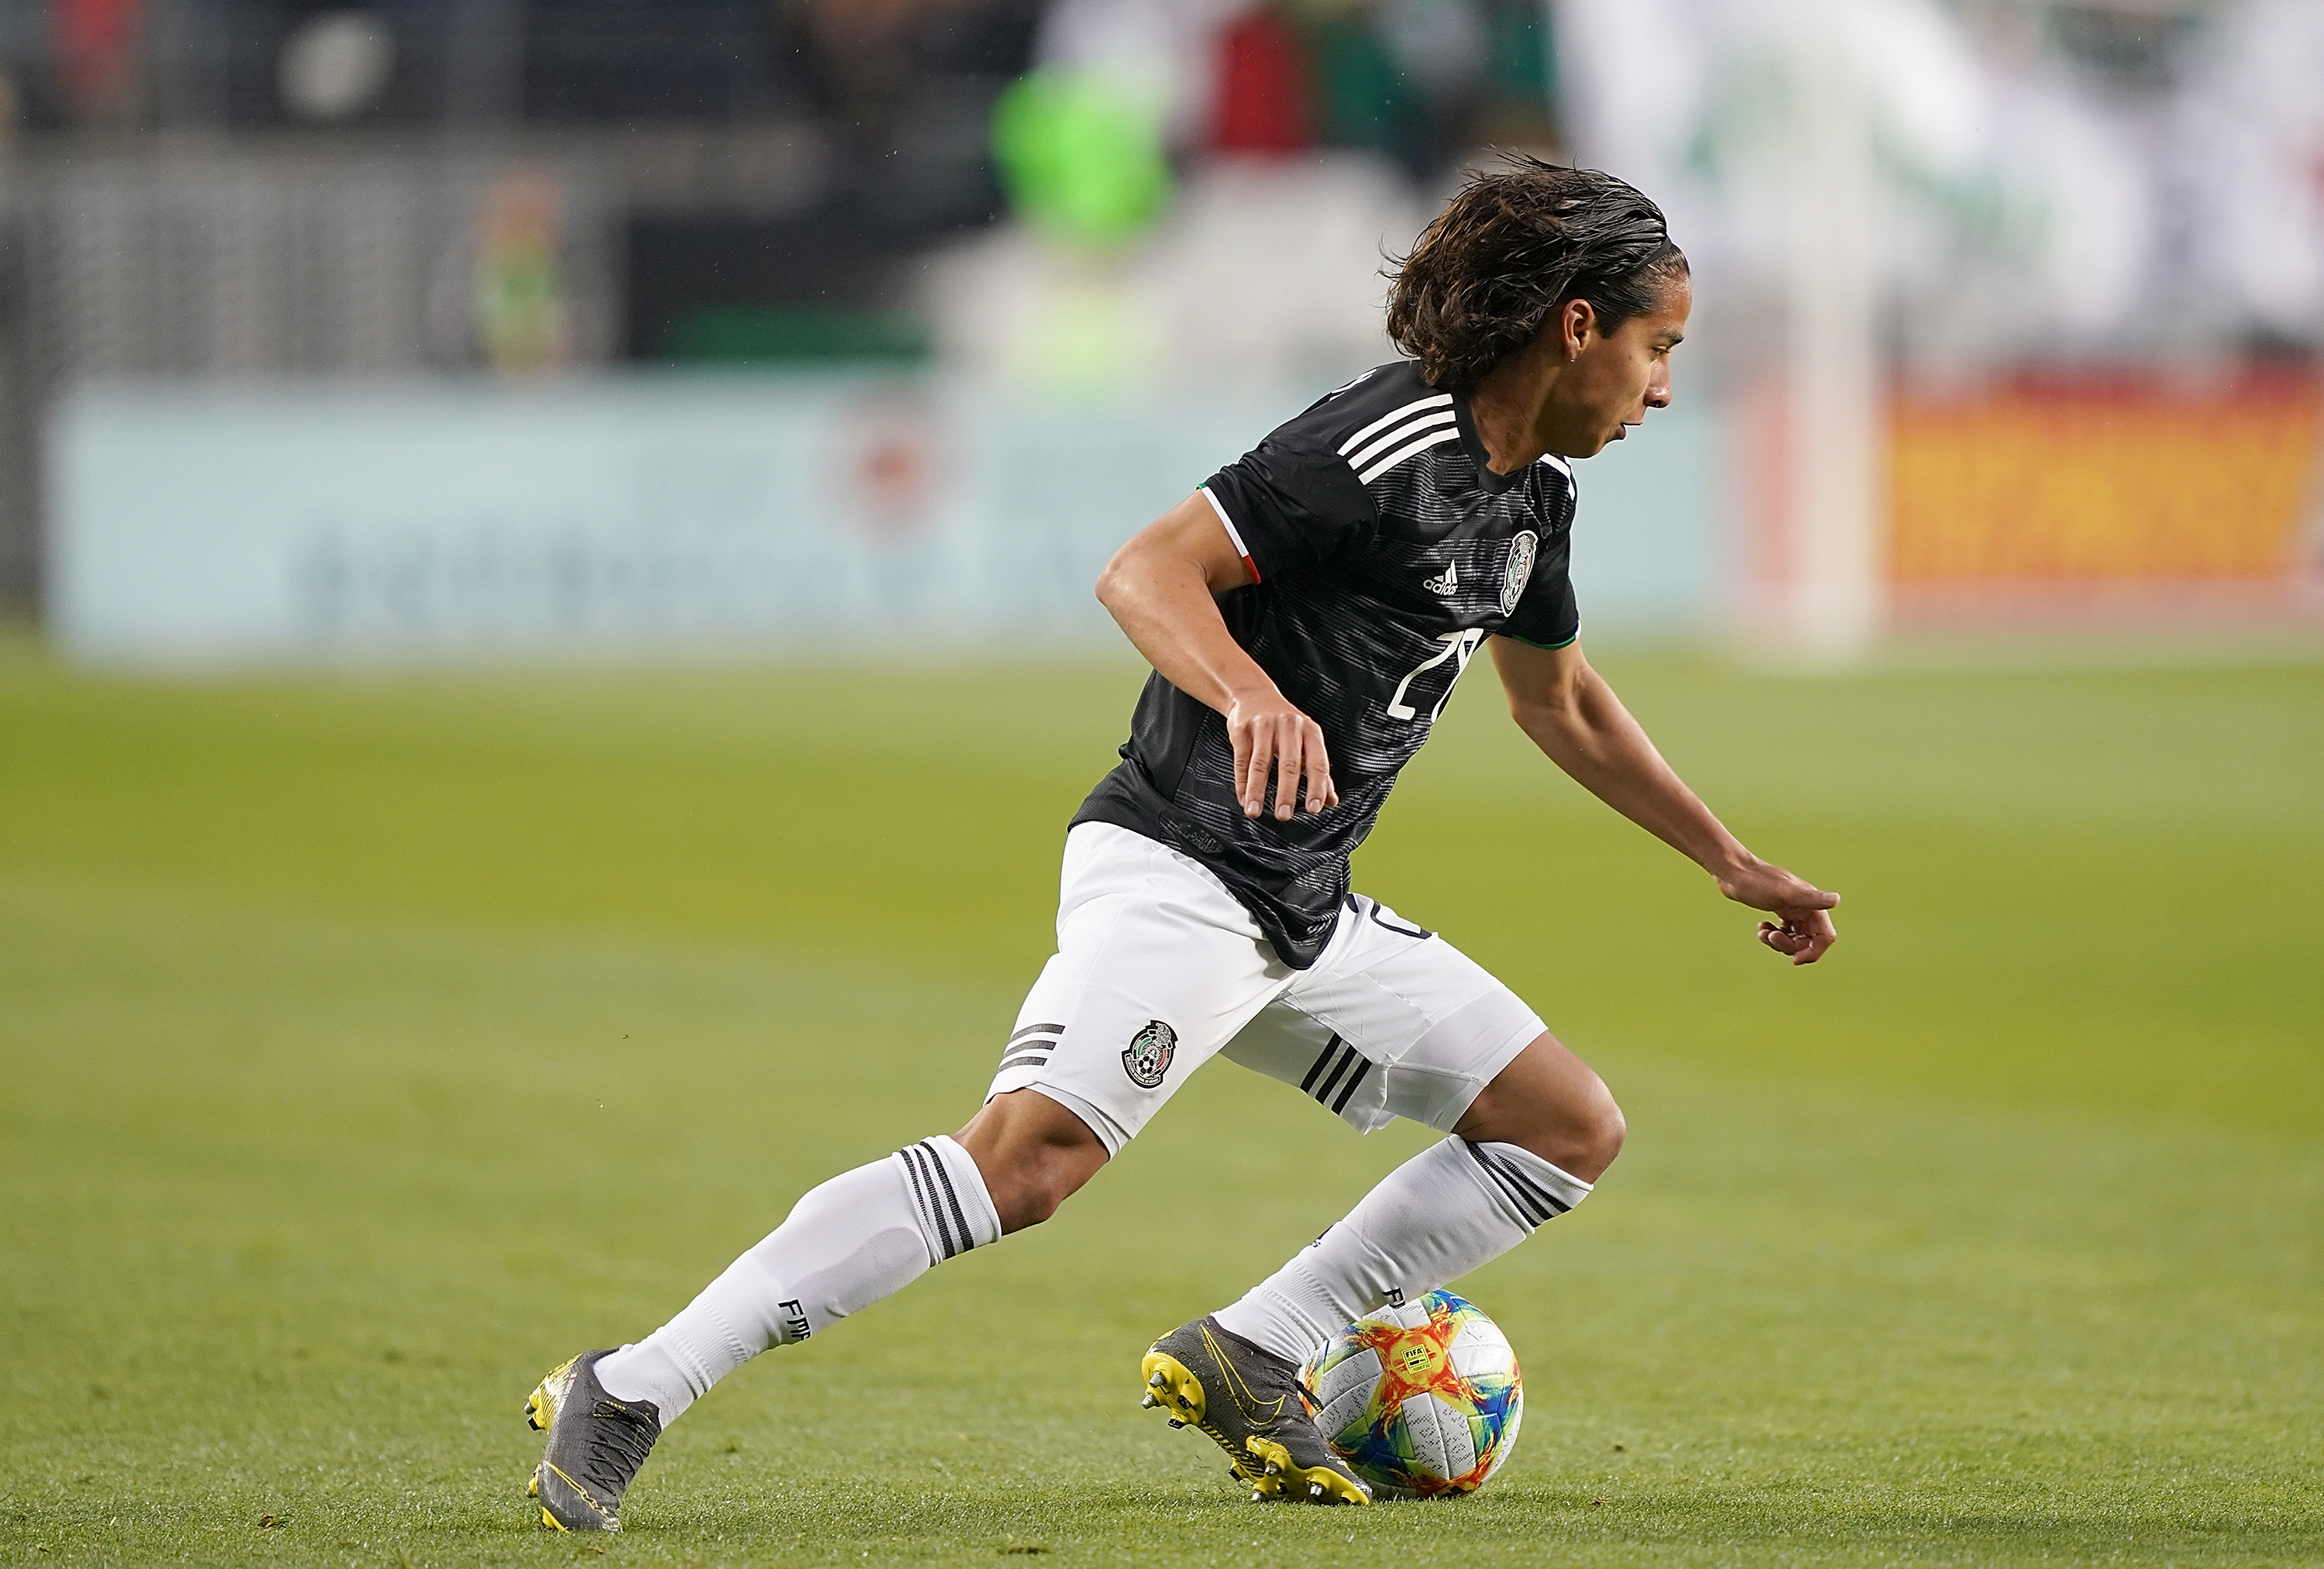 Mexico Best Young Soccer Players: 3 To Watch At The 2019 U-20 World Cup